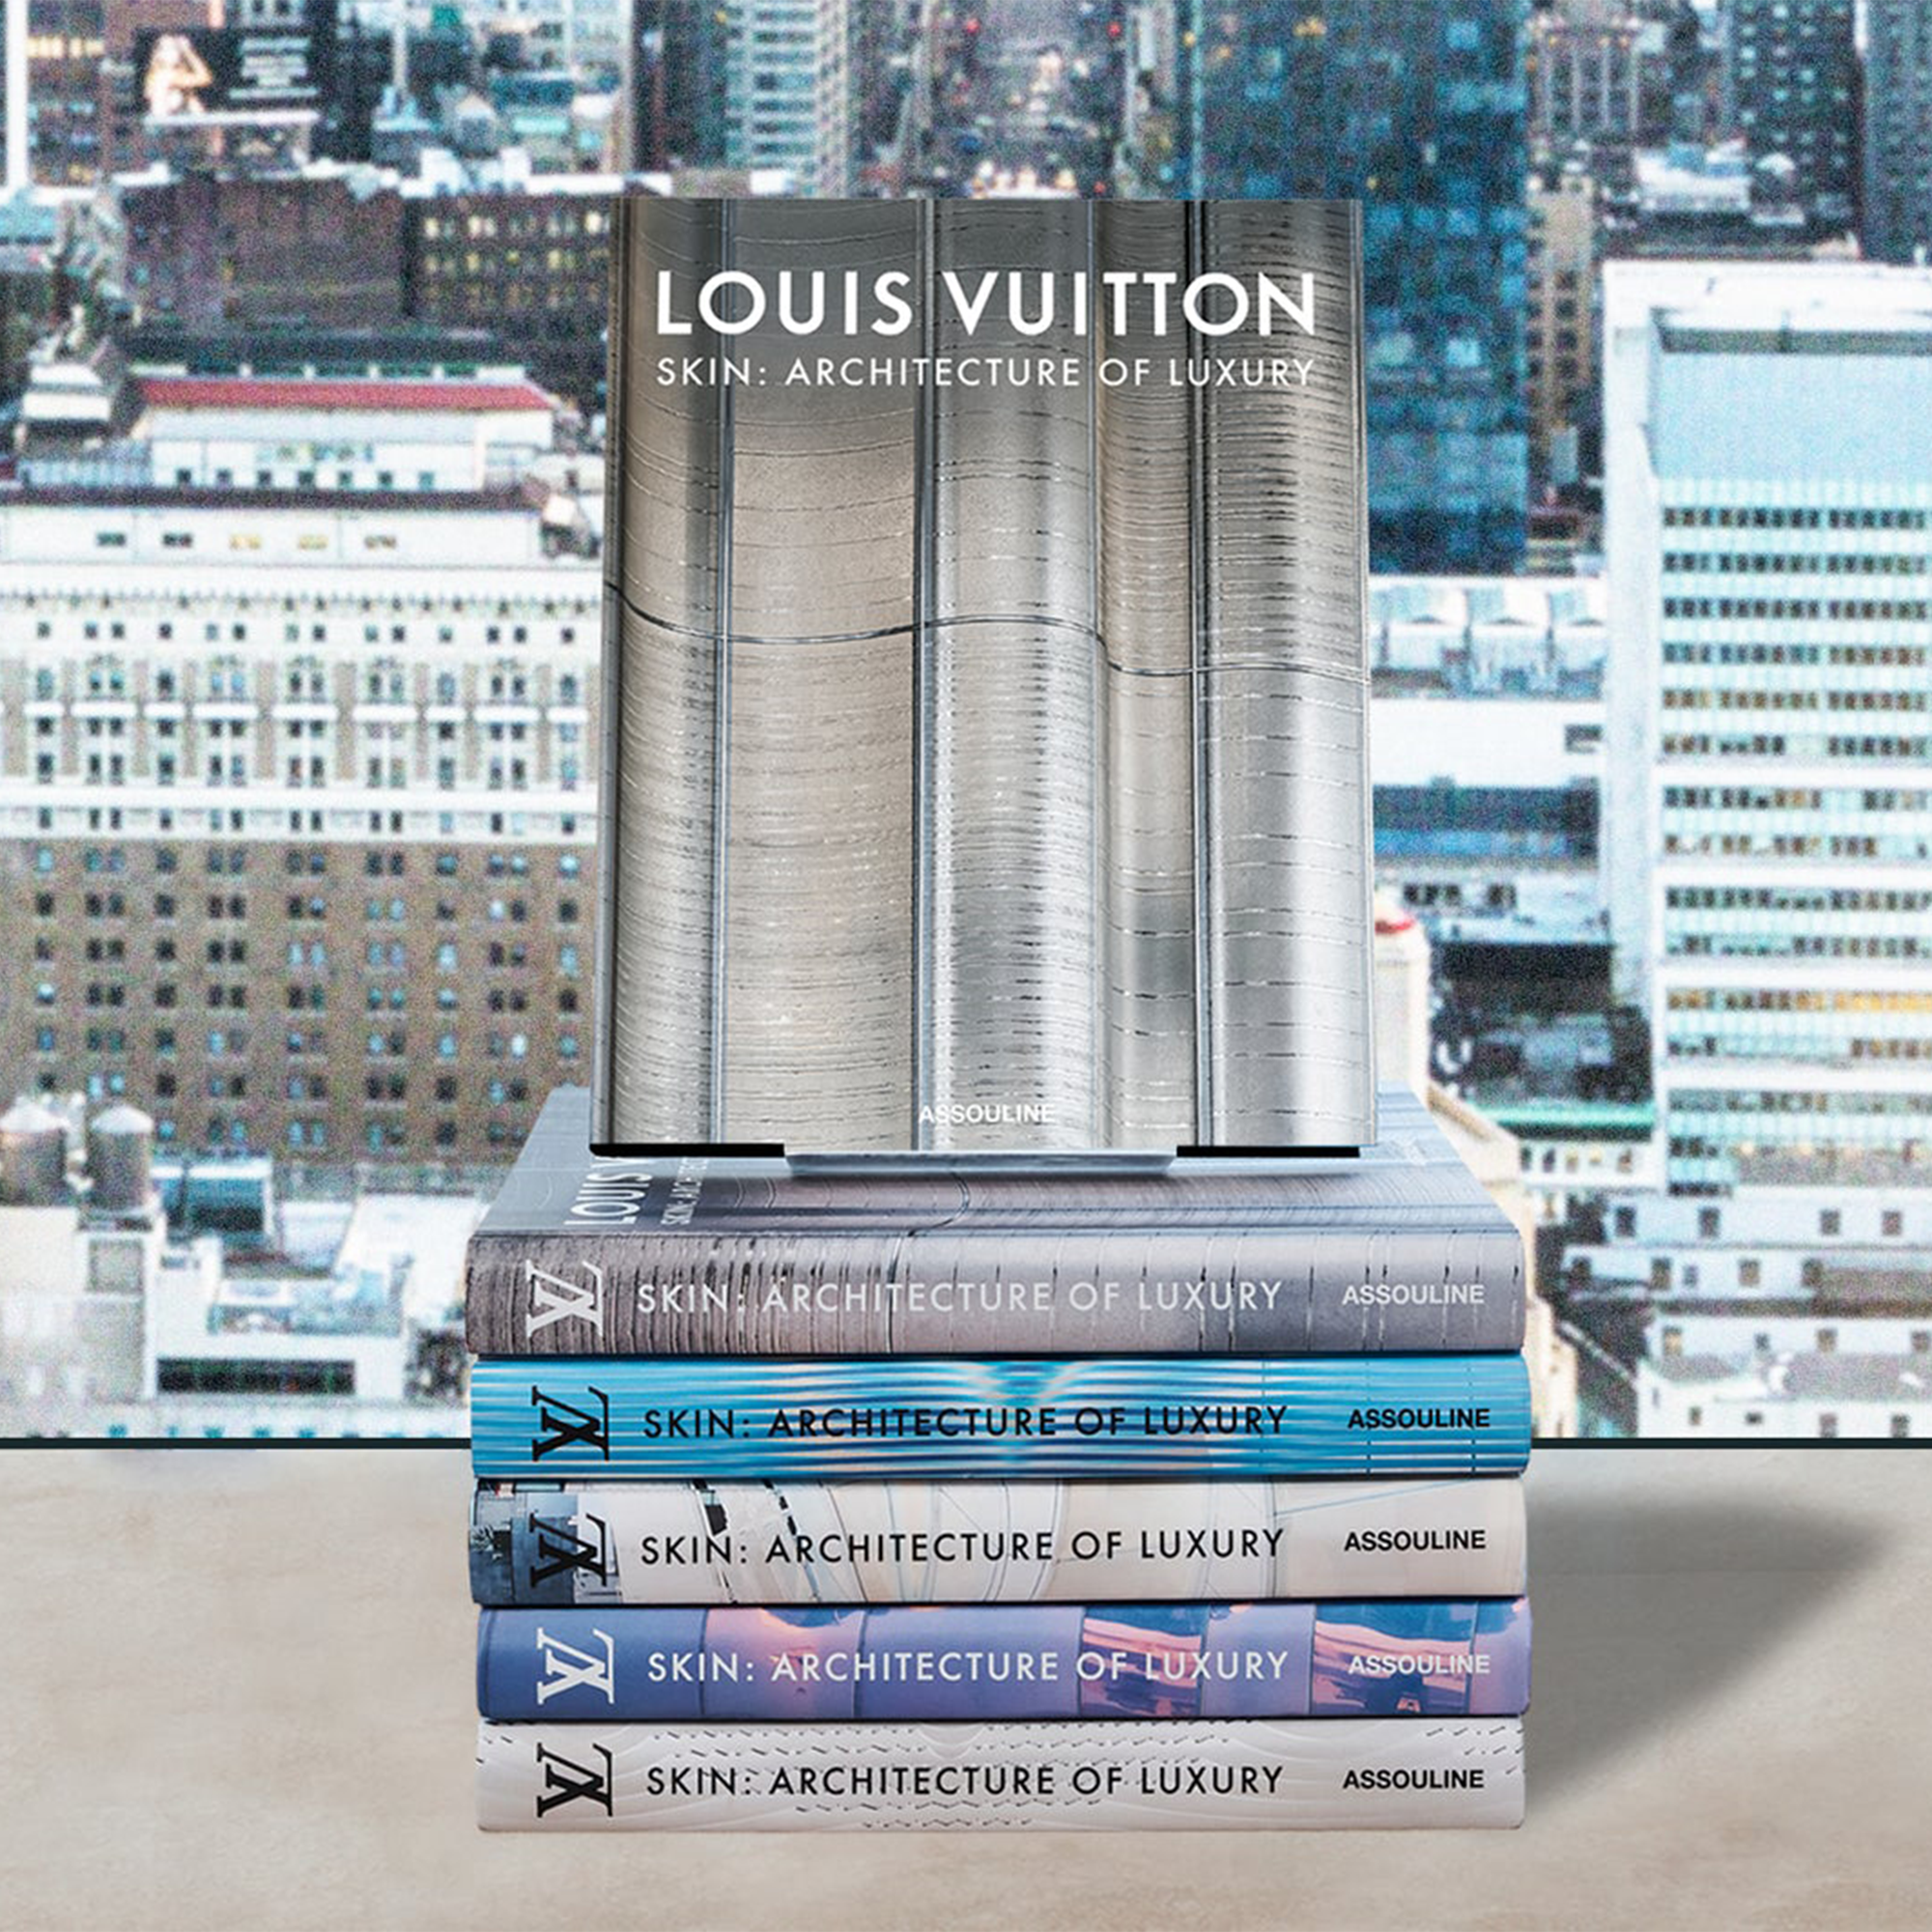 Louis Vuitton Skin: Architecture of Luxury NYC - Art of Living